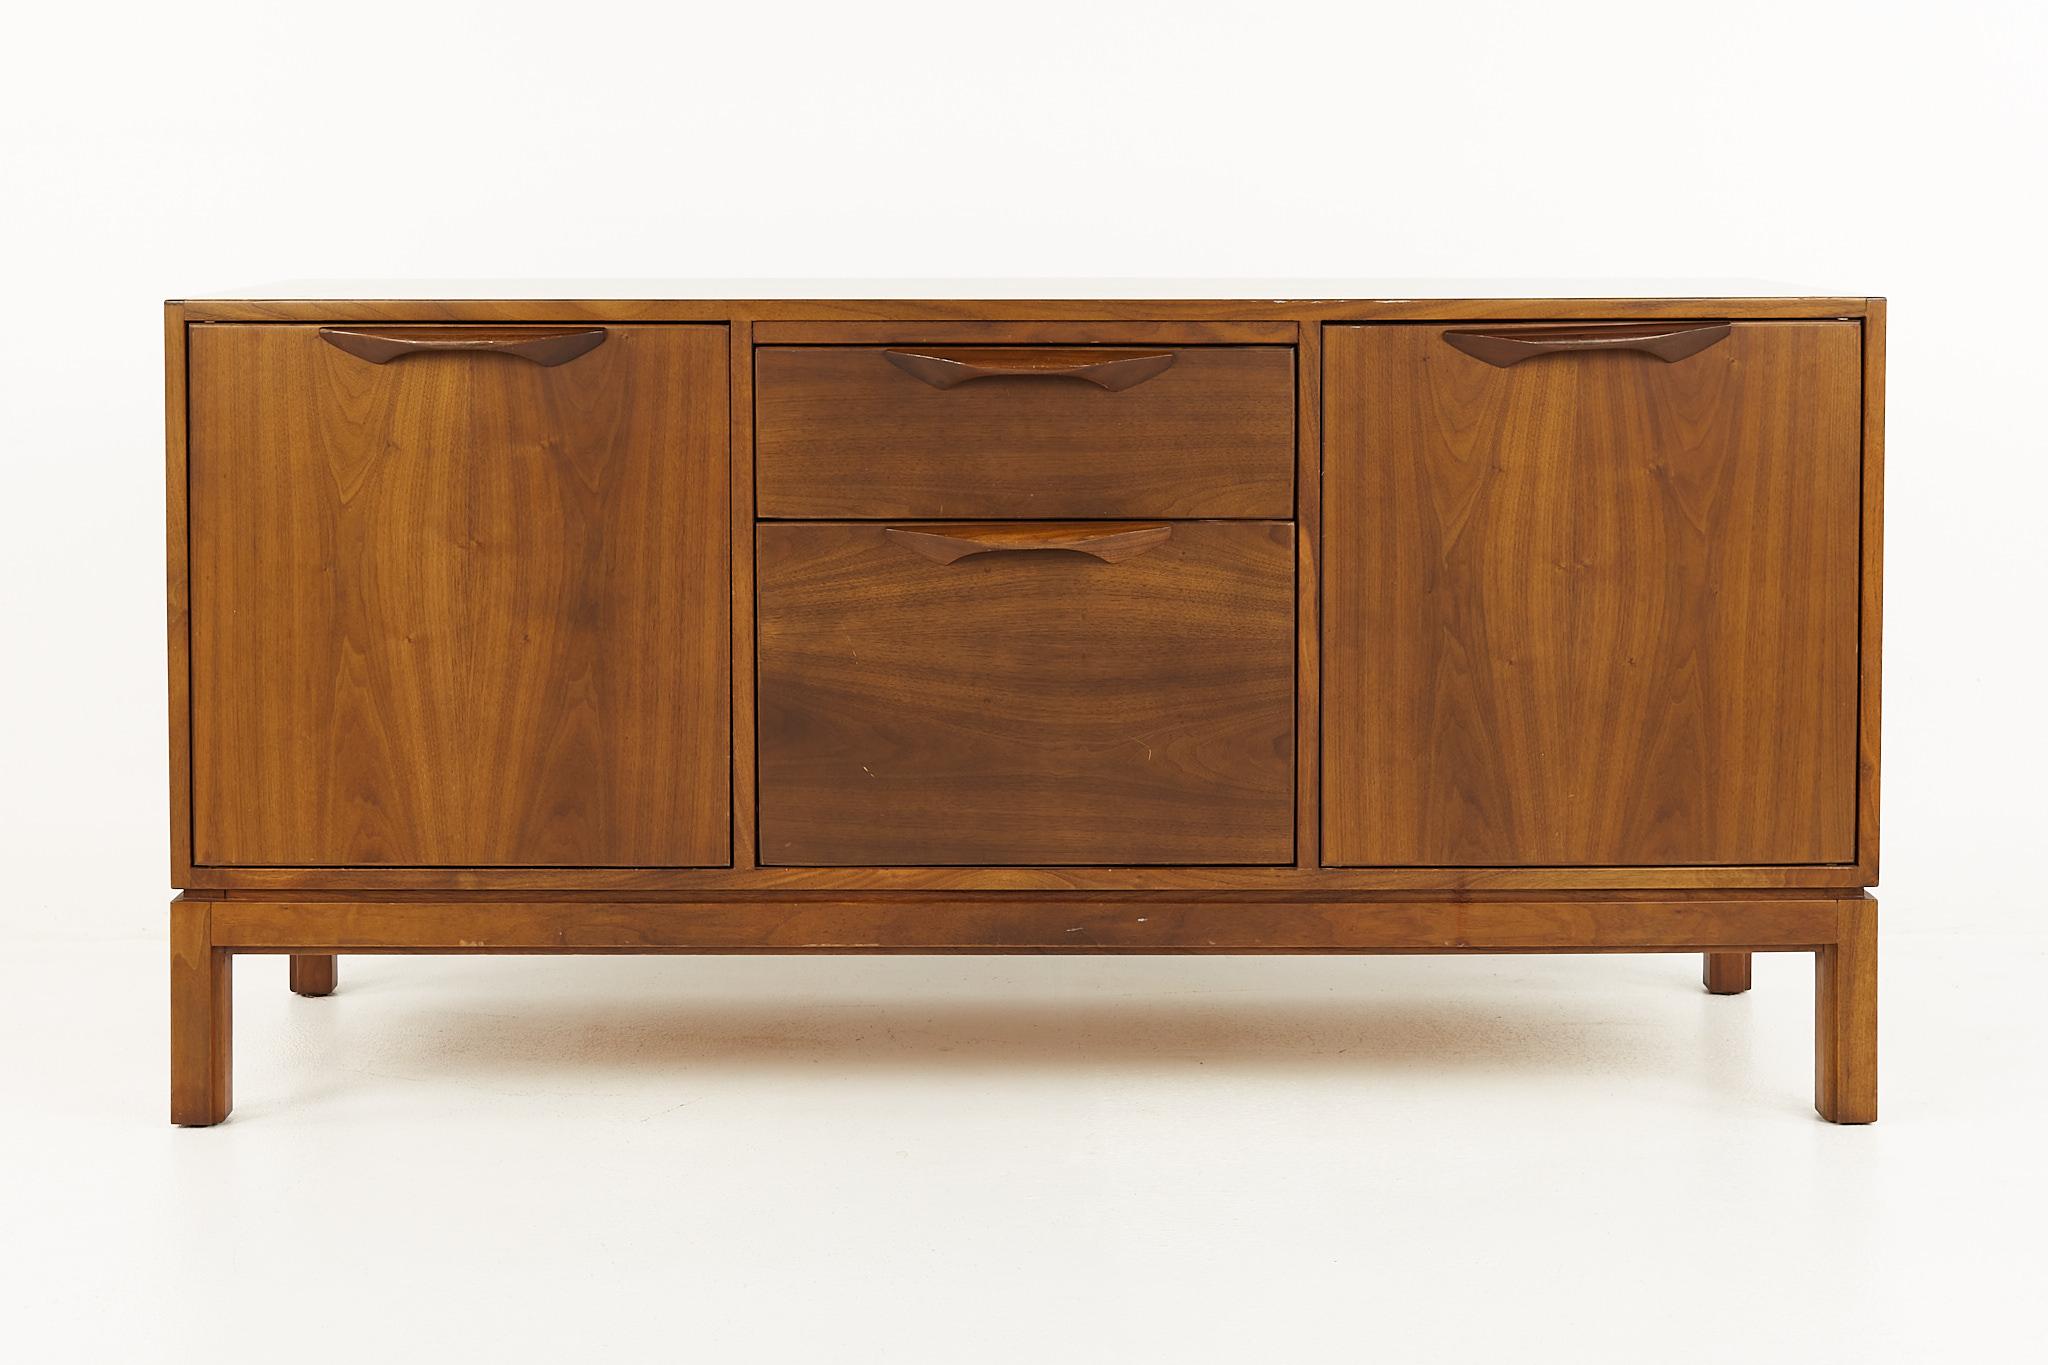 Jens Risom mid century walnut sideboard credenza

This credenza measures: 56.5 wide x 21 deep x 27.75 inches high

All pieces of furniture can be had in what we call restored vintage condition. That means the piece is restored upon purchase so